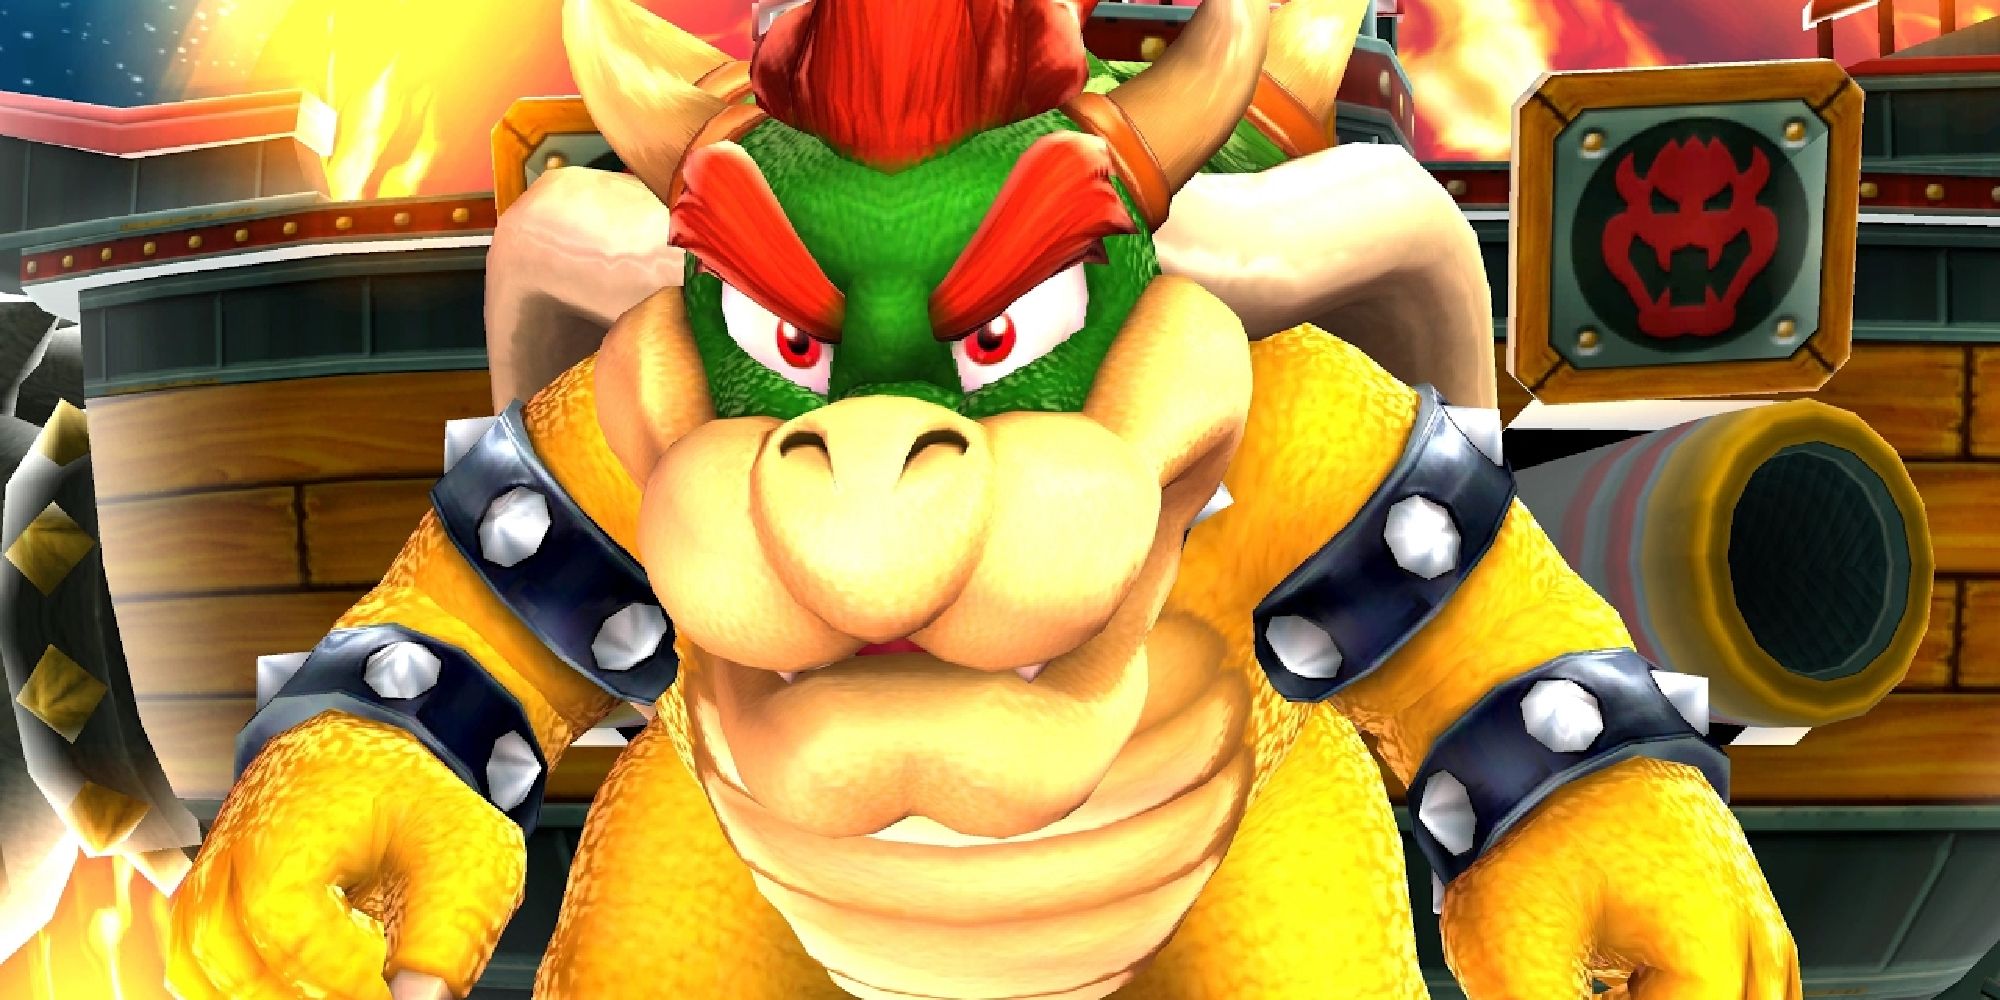 Bowser standing in front of his warship in Super Mario Galaxy